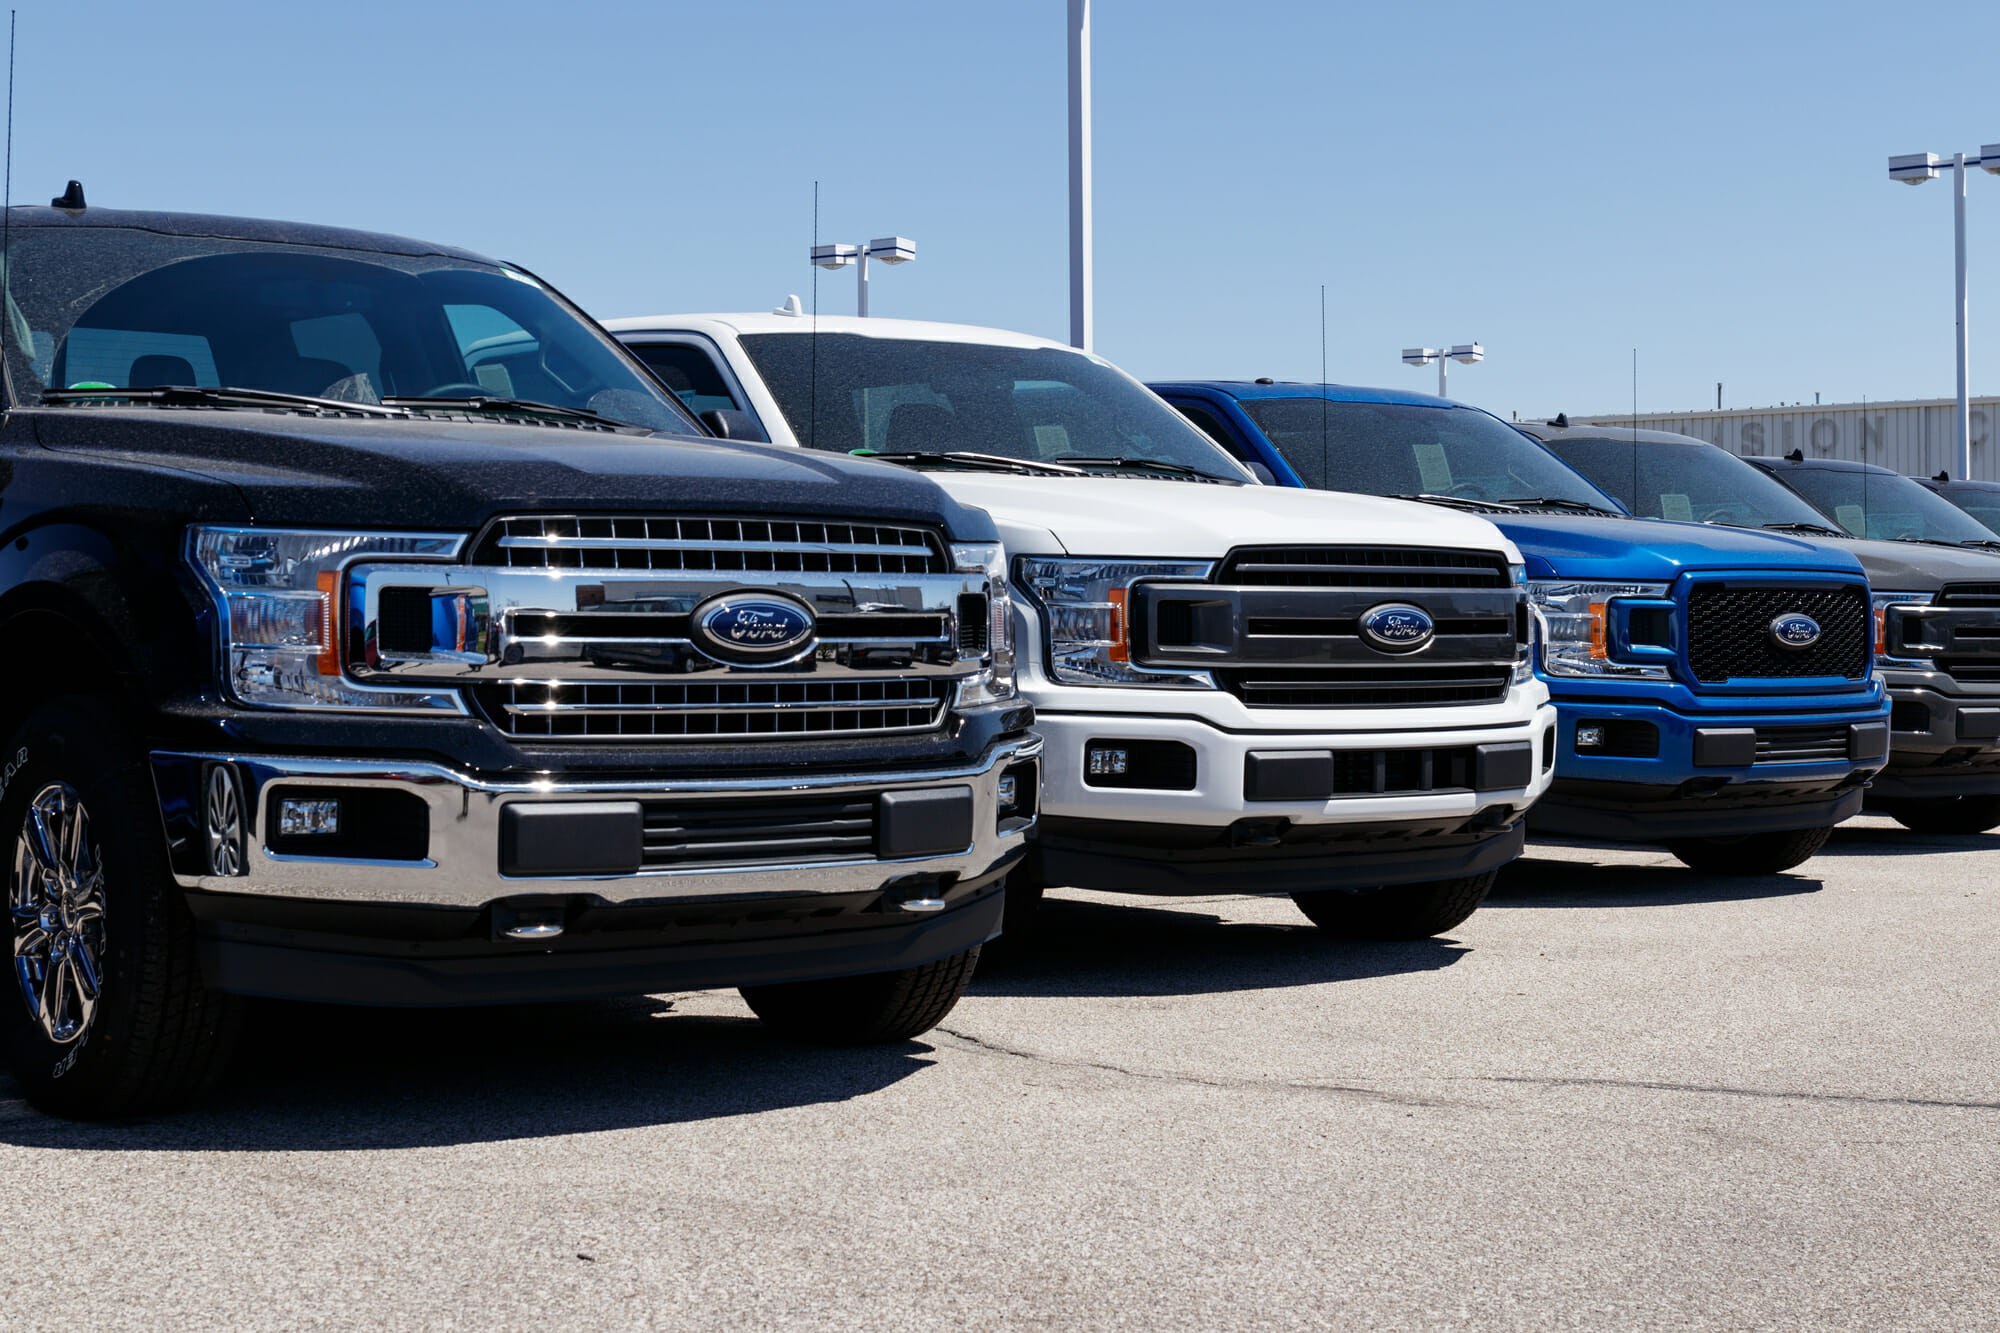 Ford F-150 truck lineup - Vehicle History